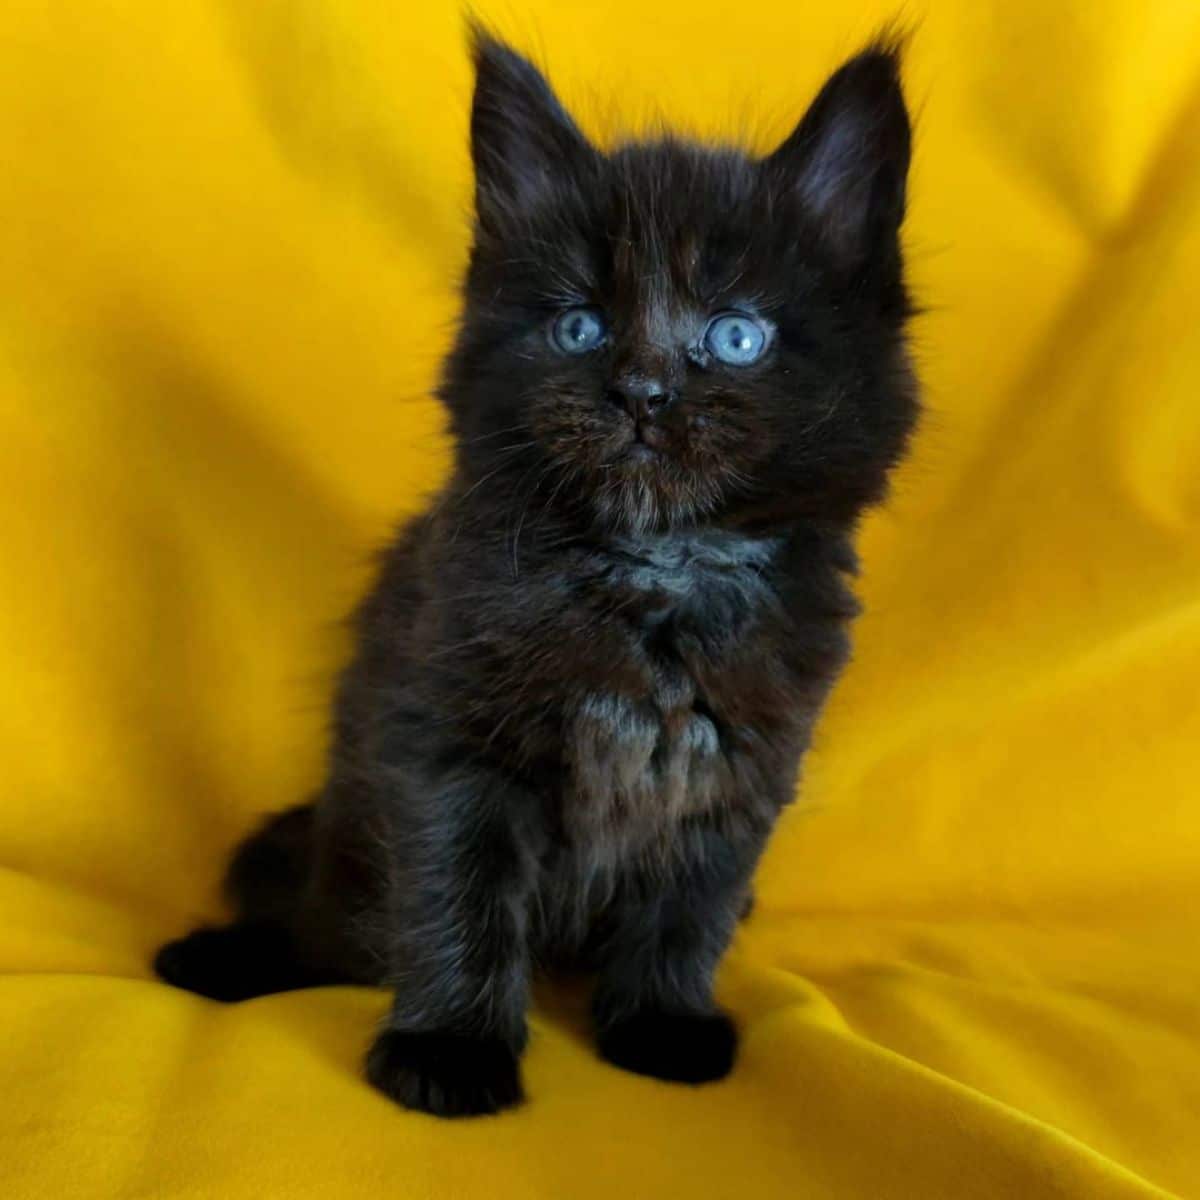 An adorable black maine coon kitten with blue eyes sitting on a yellow blanket.